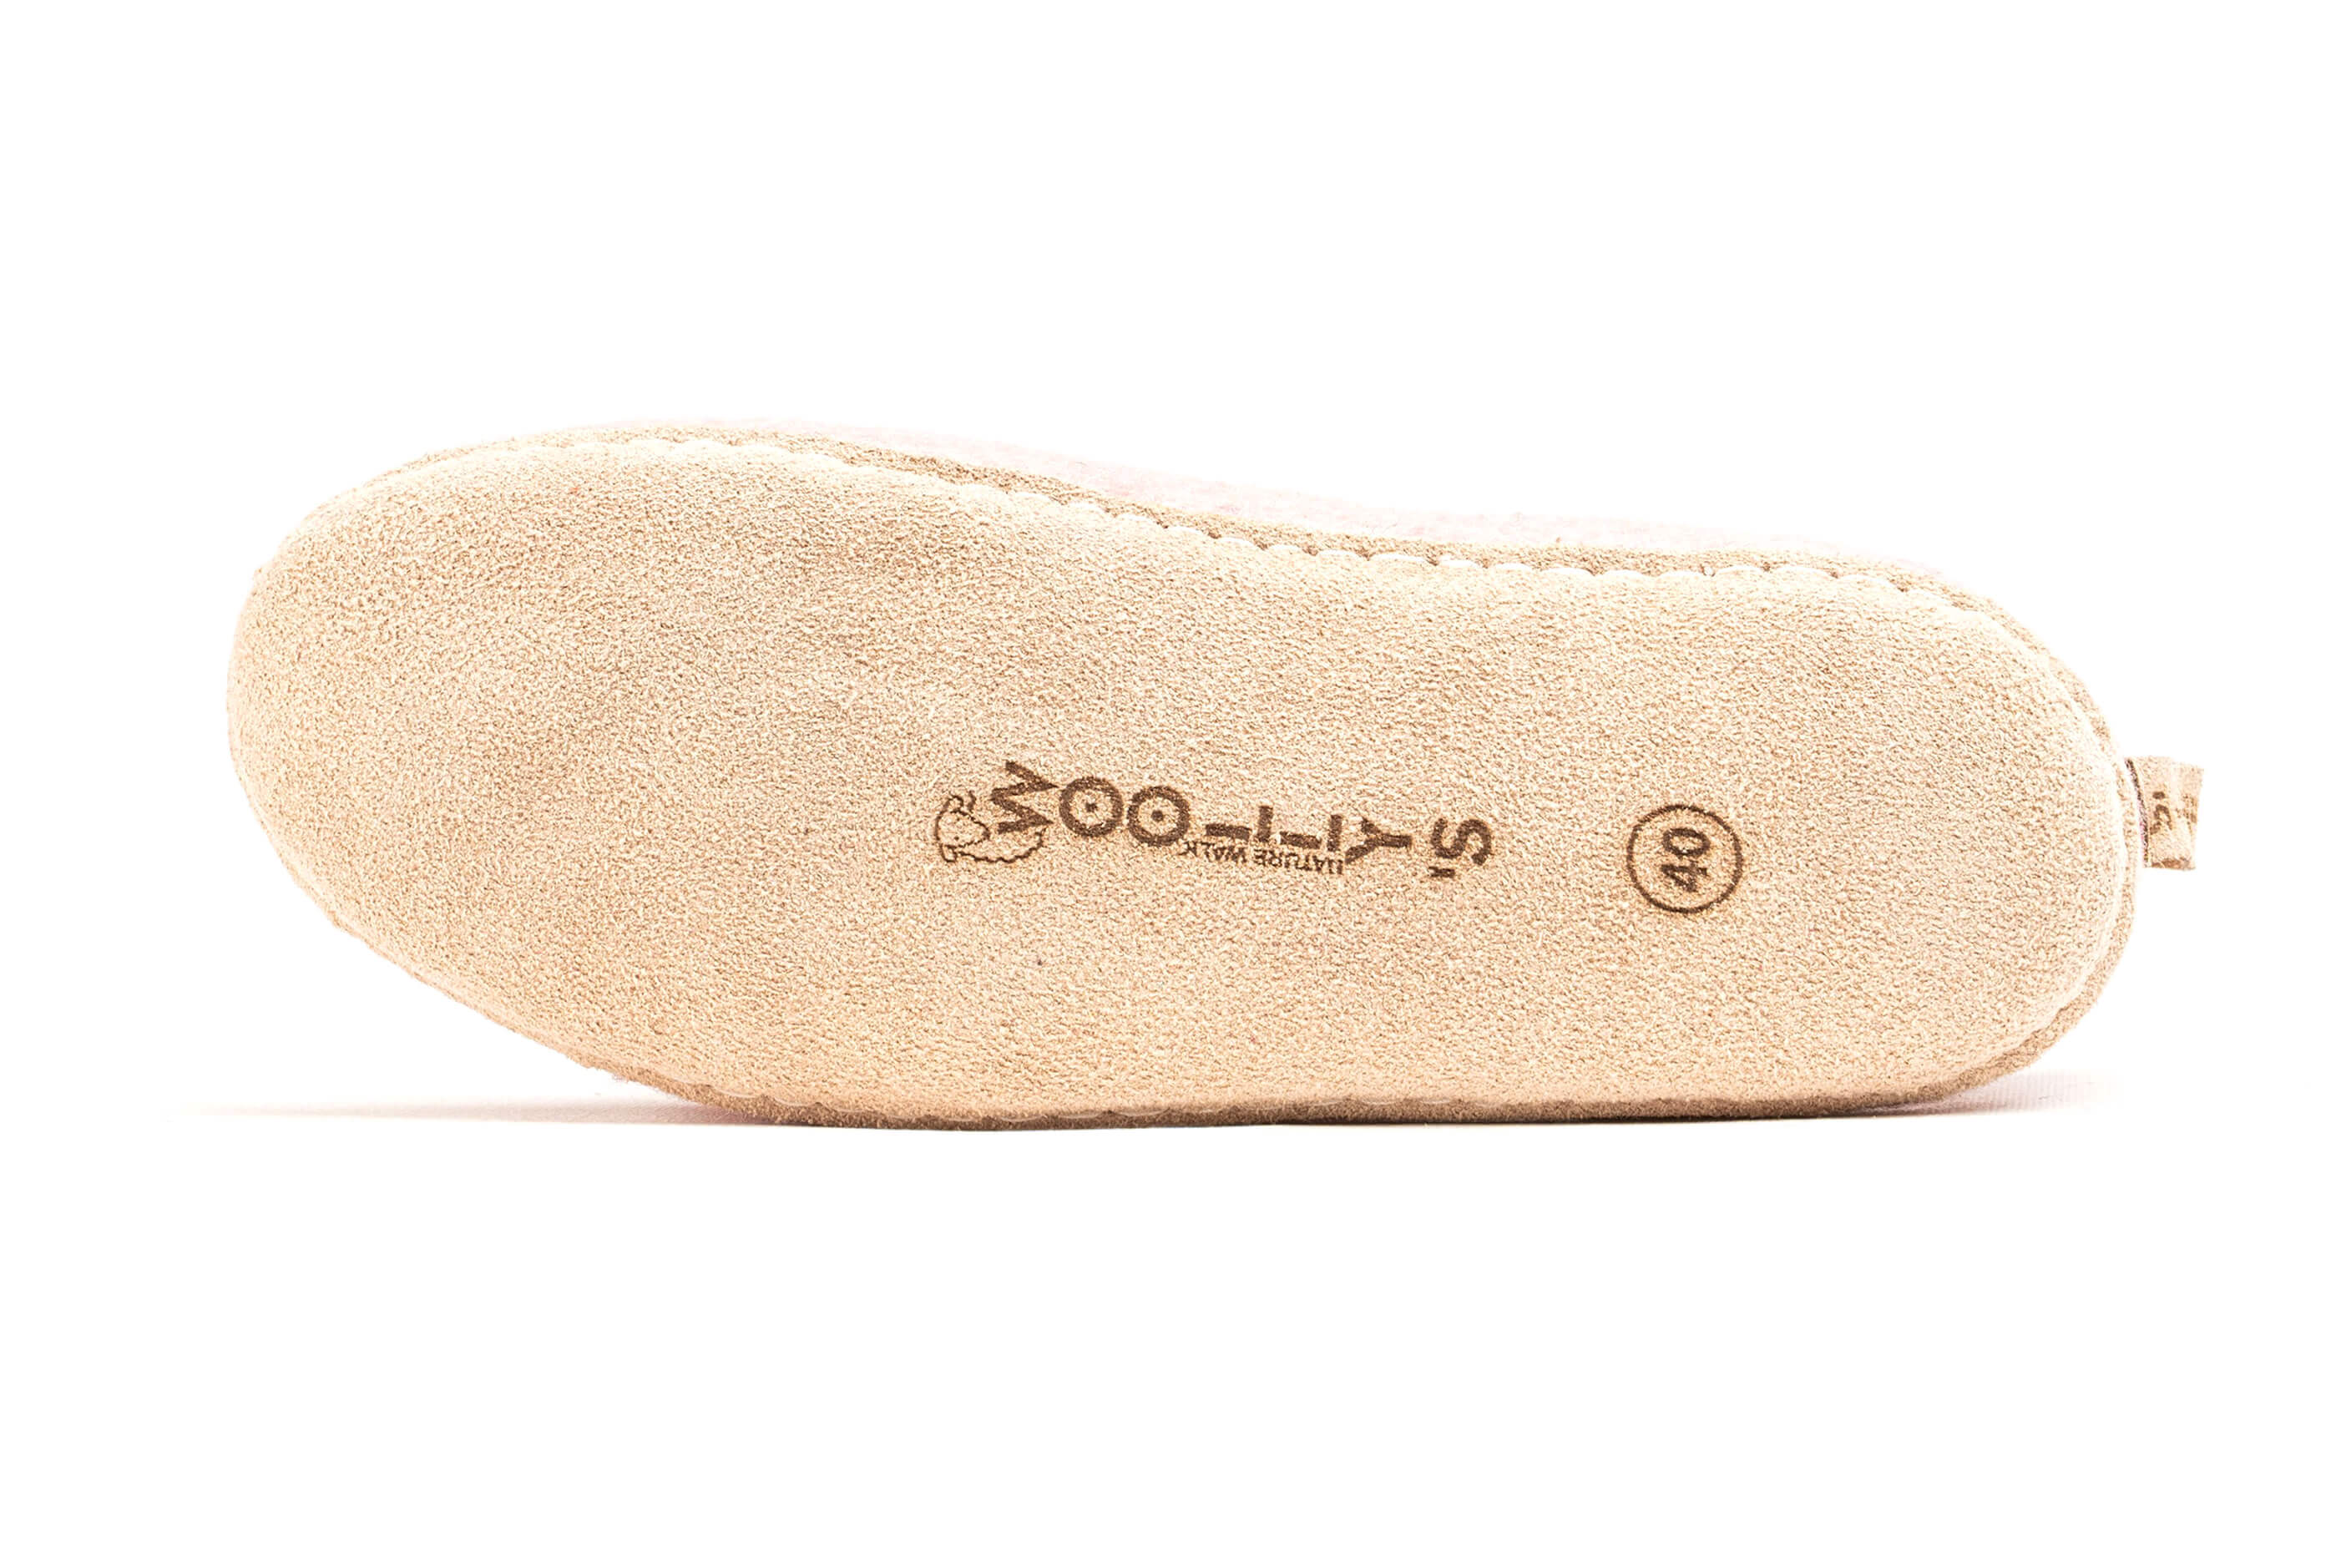 Indoor Shoes With Leather Sole - Baby Pink